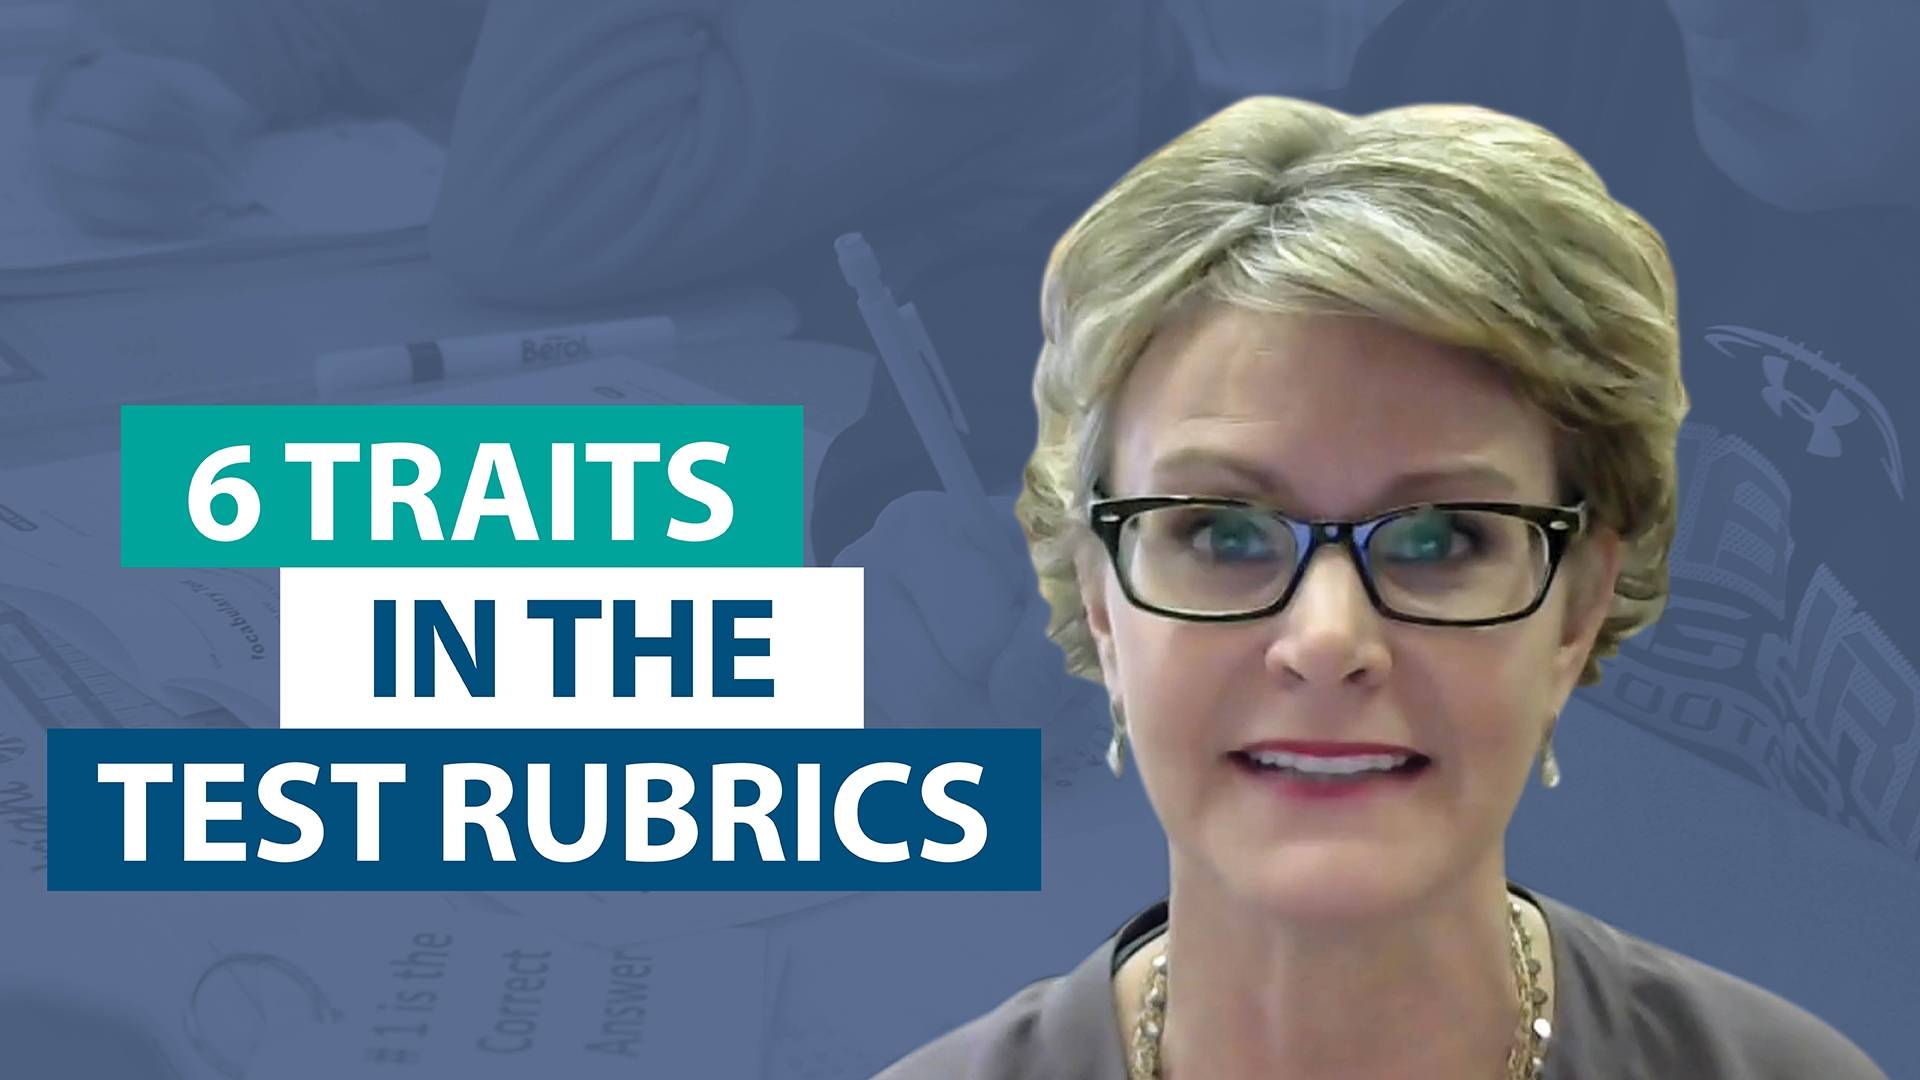 Identify how the 6 Traits fit within state writing rubrics